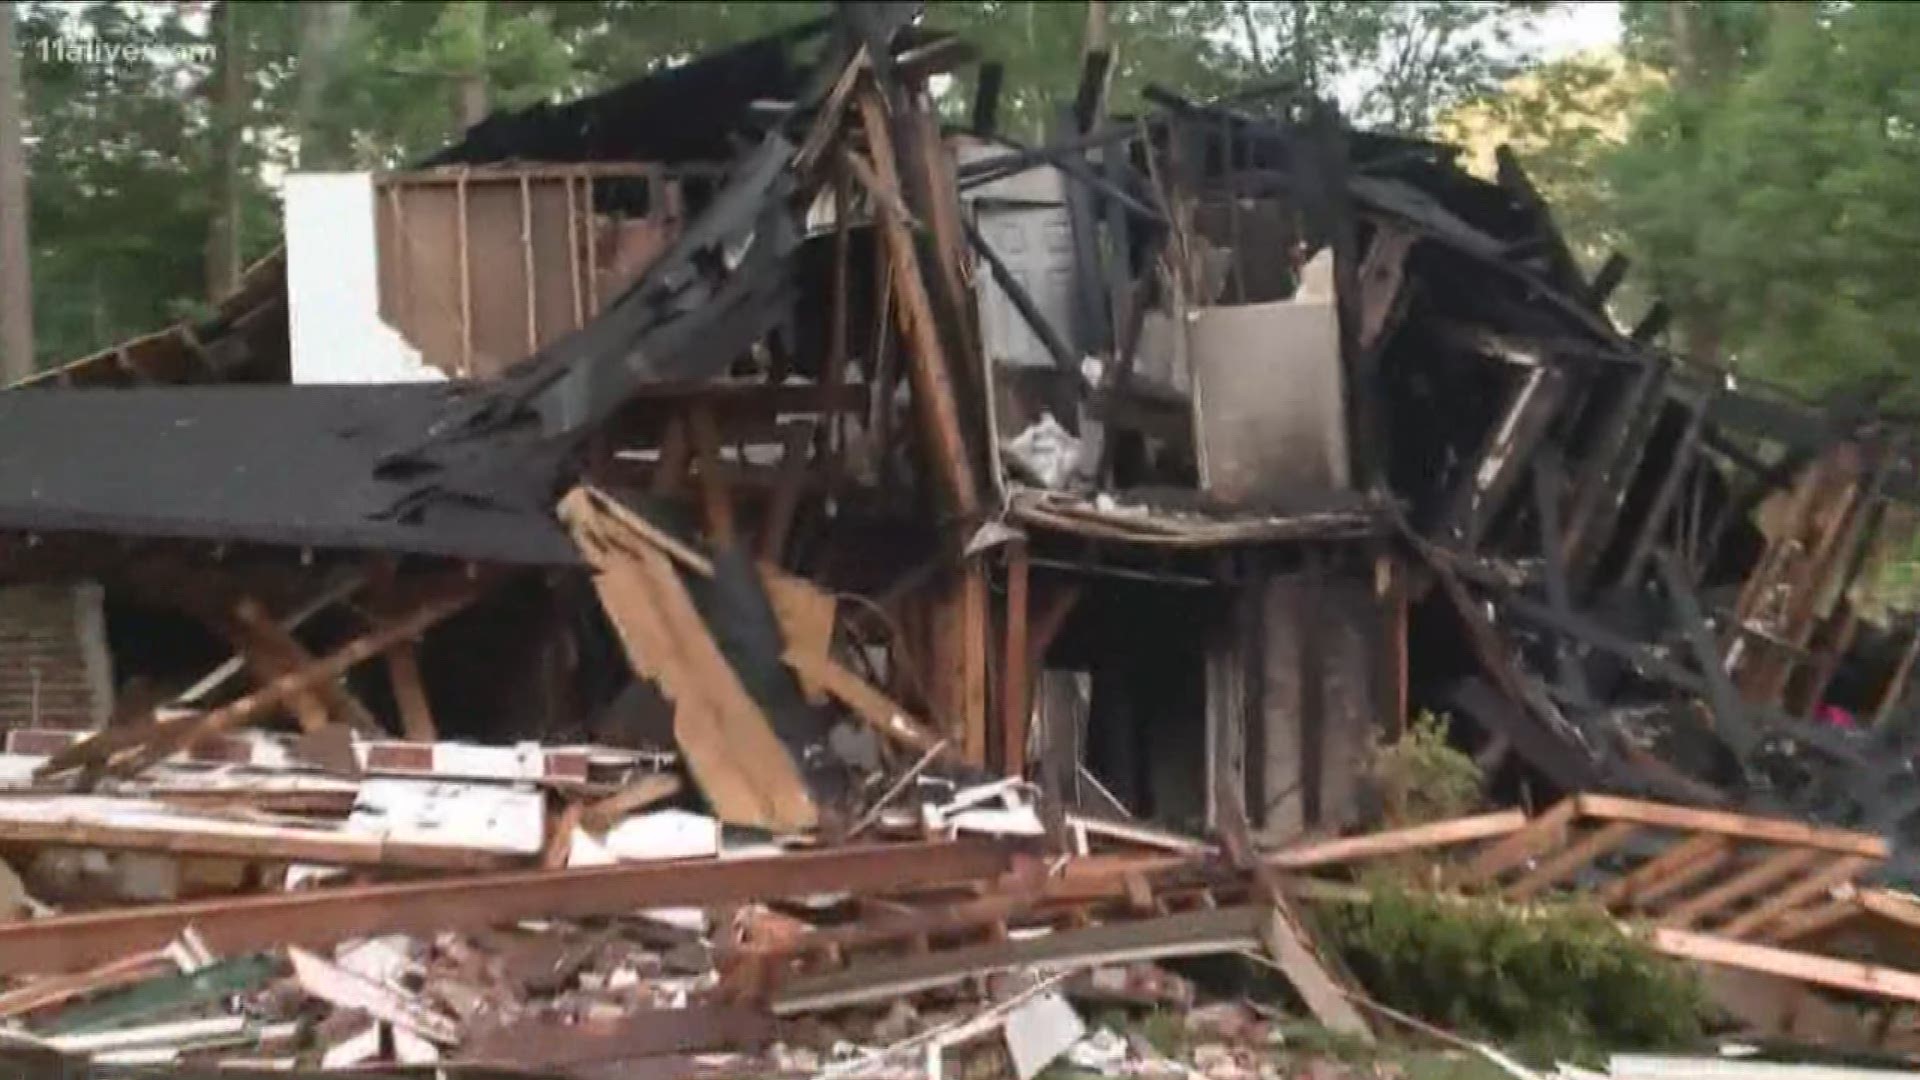 A 6-year-old boy and his father were able to escape the wreckage as their house in Austell collapsed and caught fire in an explosion on Sunday.